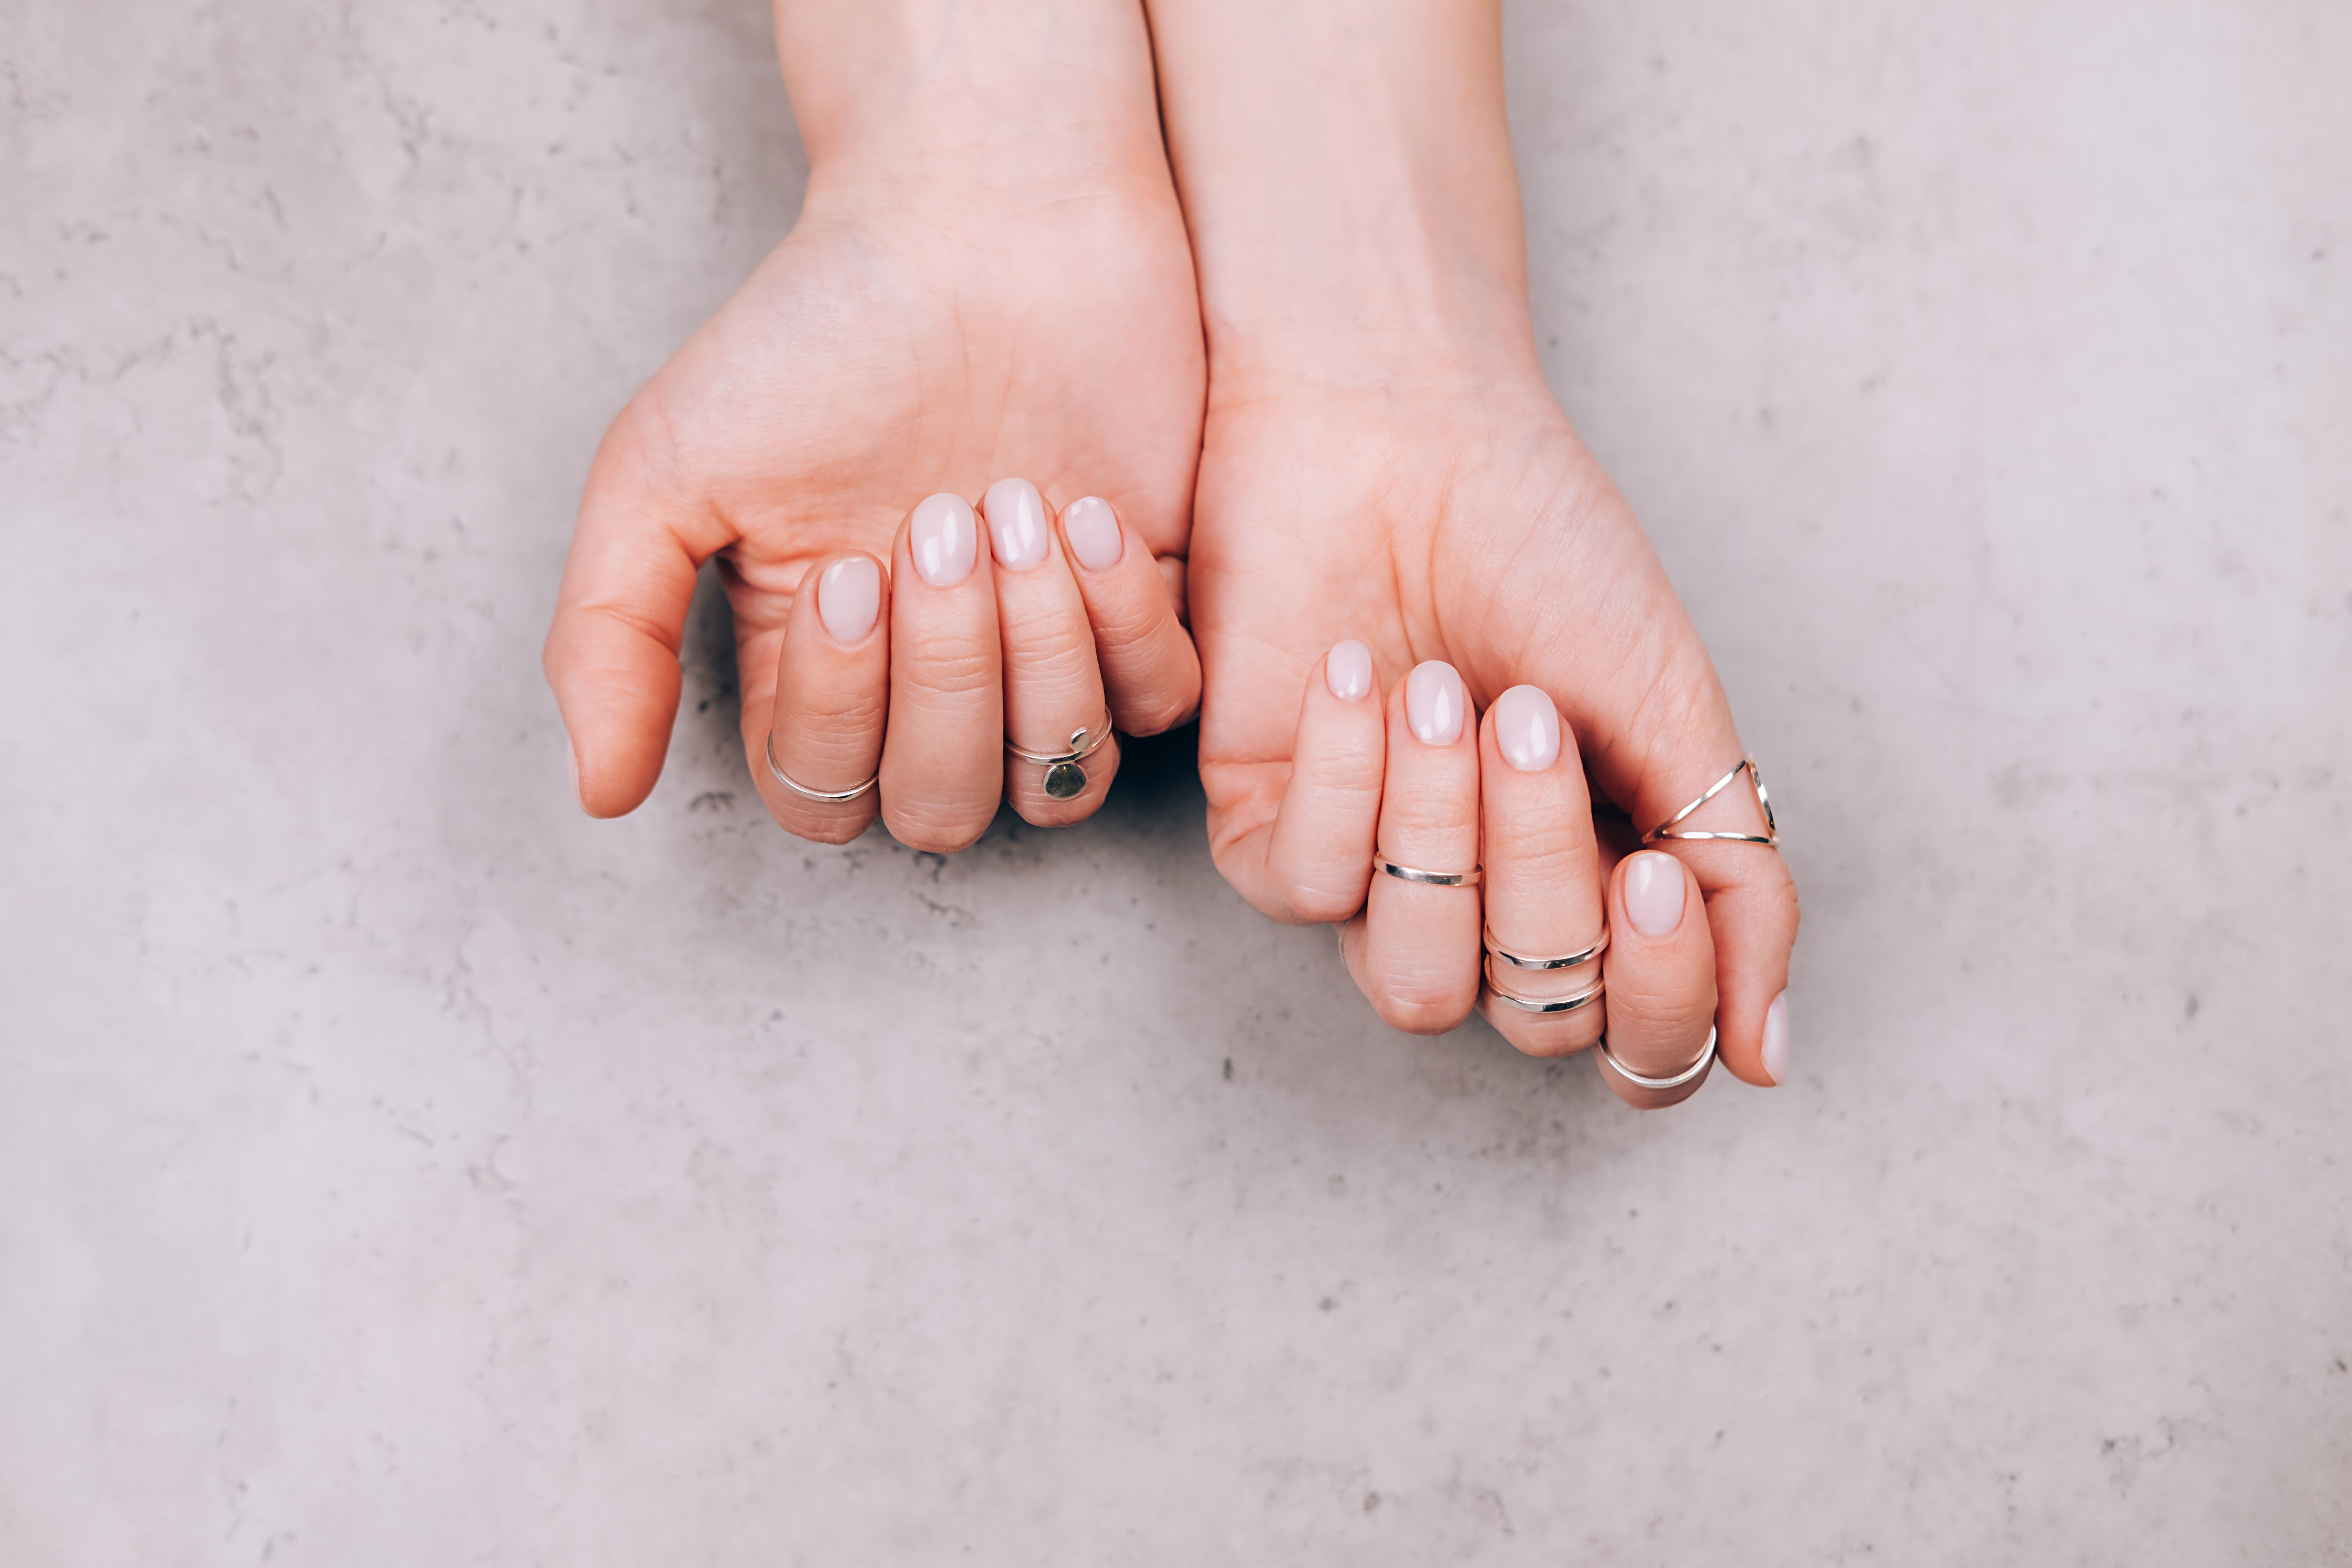 Dip Powder Nails: Experts Explain Benefits And What To Know